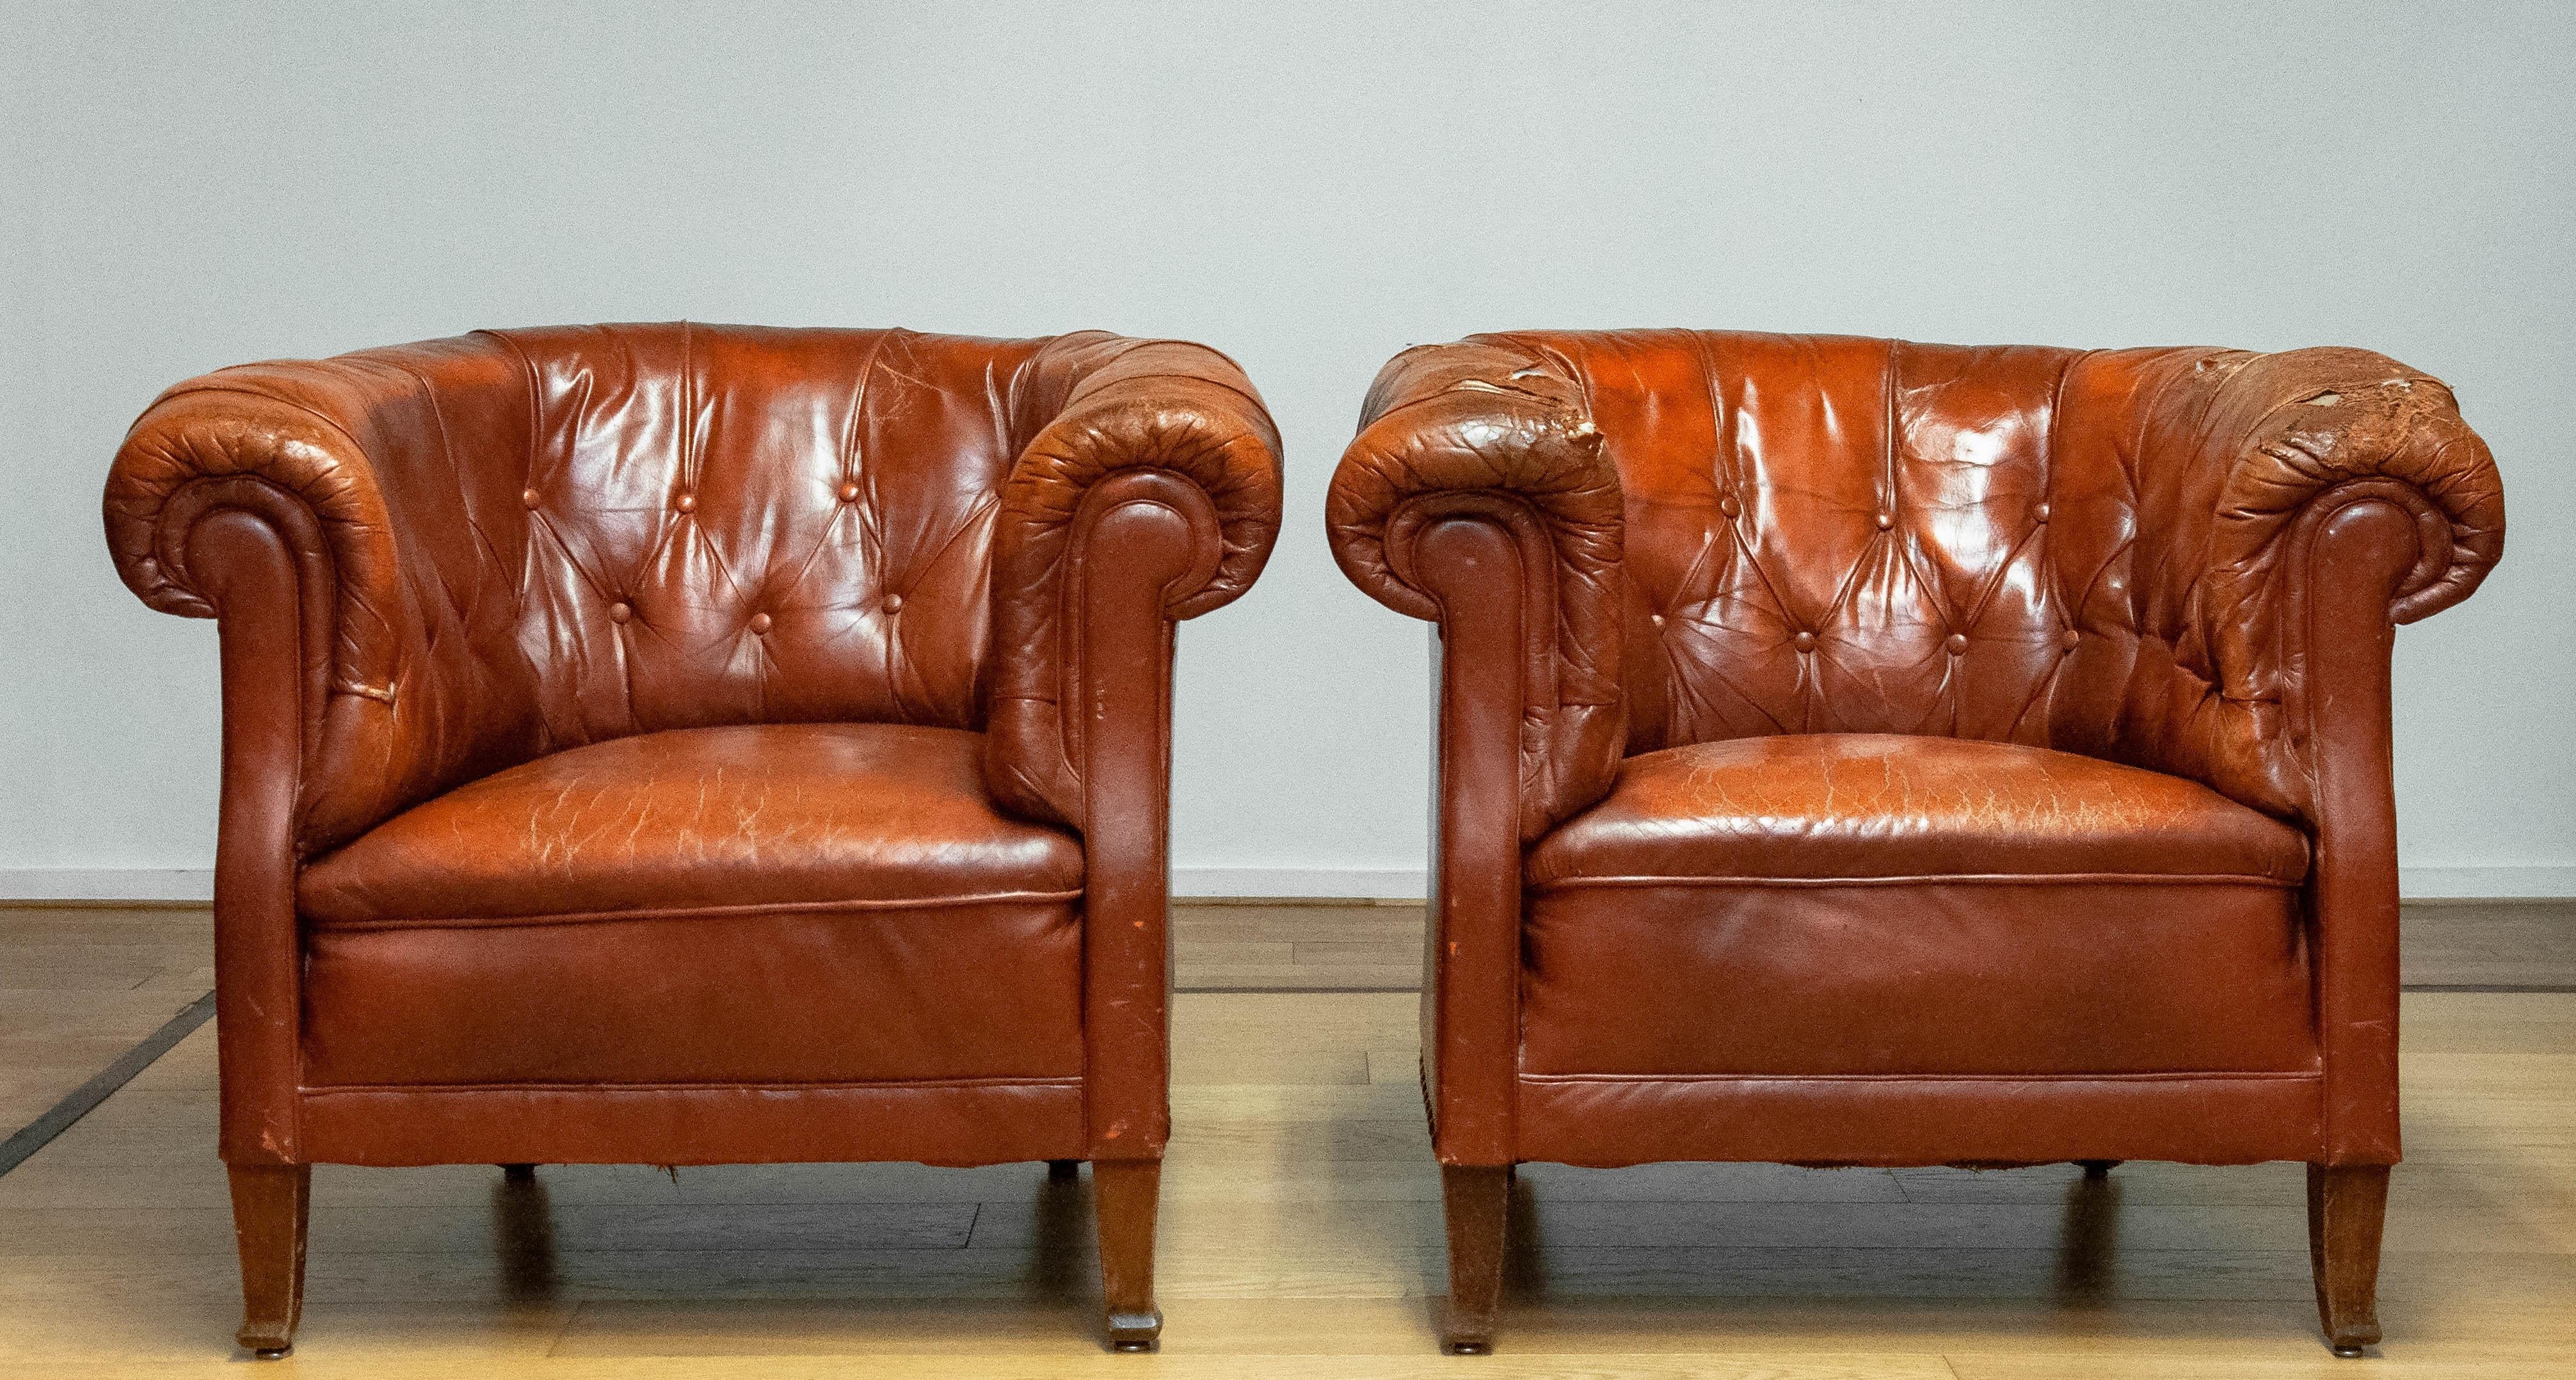 Pair absolutely fantastic and beautiful authentic ' Chesterfield model' club chairs made in Sweden in the 1940s.
The great vintage / antique patina what gives these chairs their absolutely unique character makes these chairs a absolute decorative